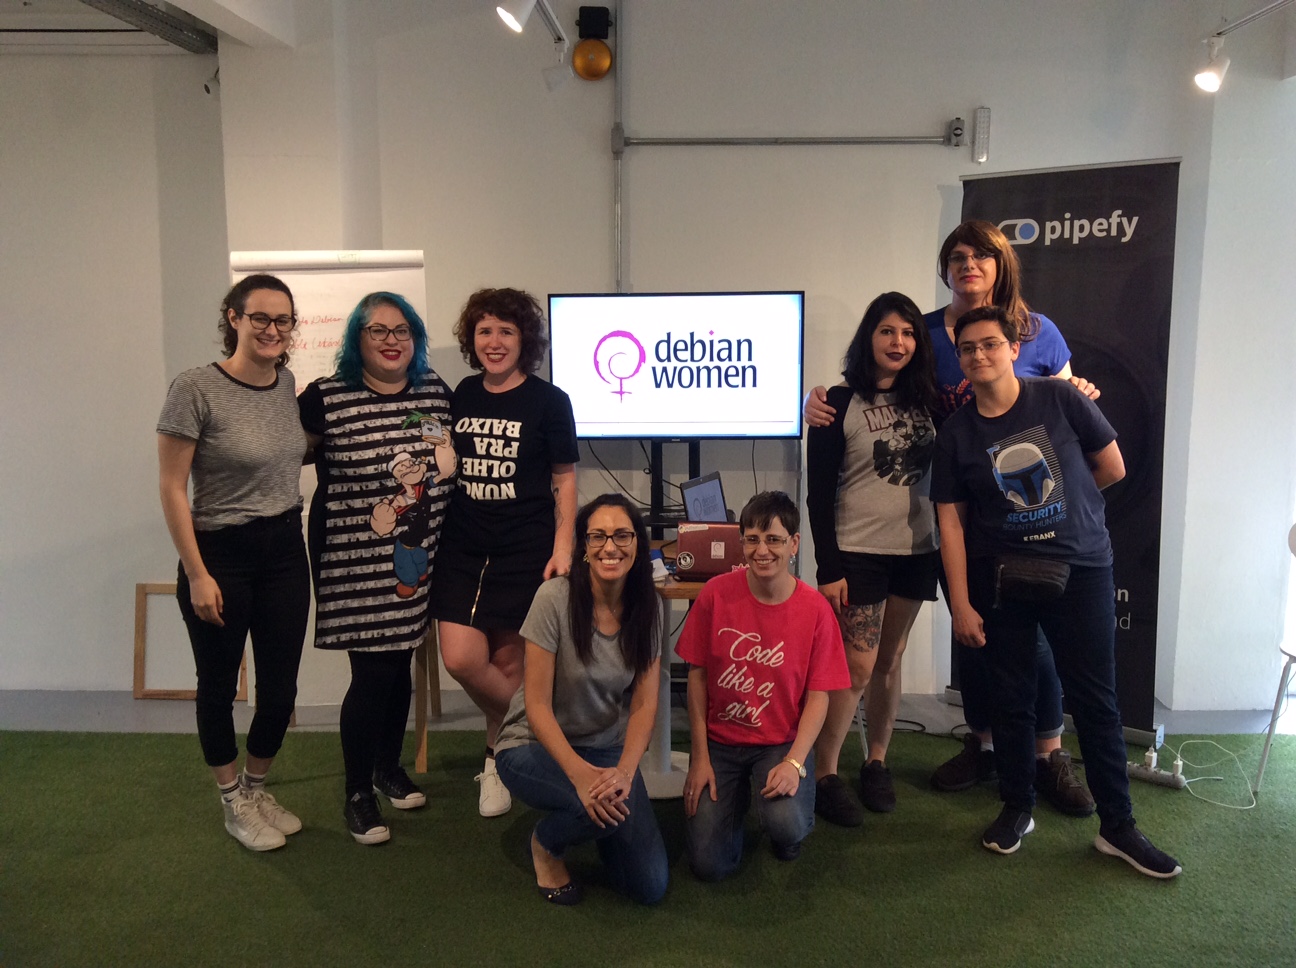 The eight women who attended the meeting gathered together in front of a tv with the Debian Women logo